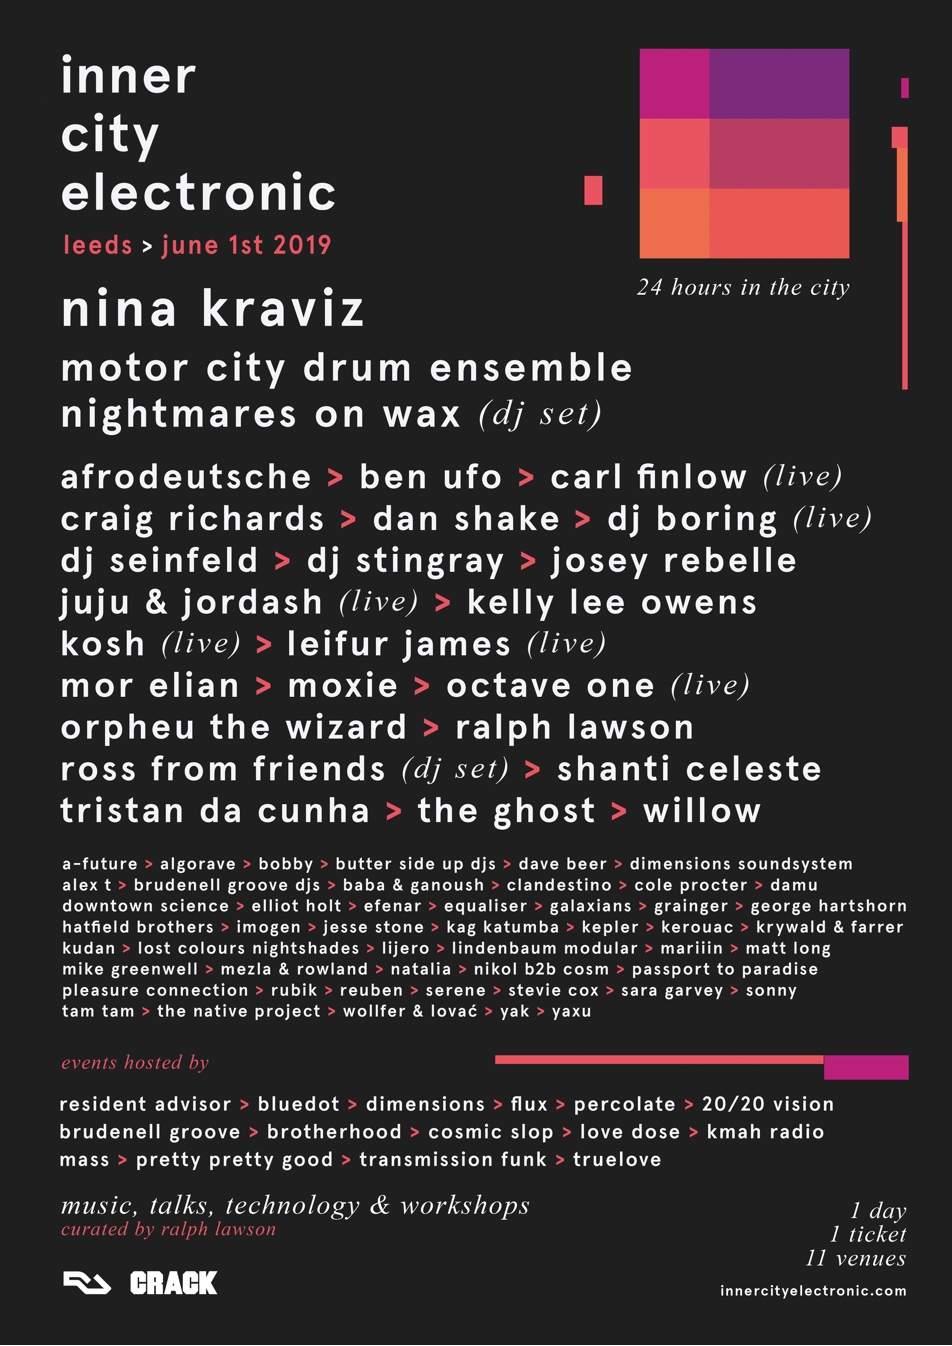 Leeds one-day festival inner city electronic adds new names image